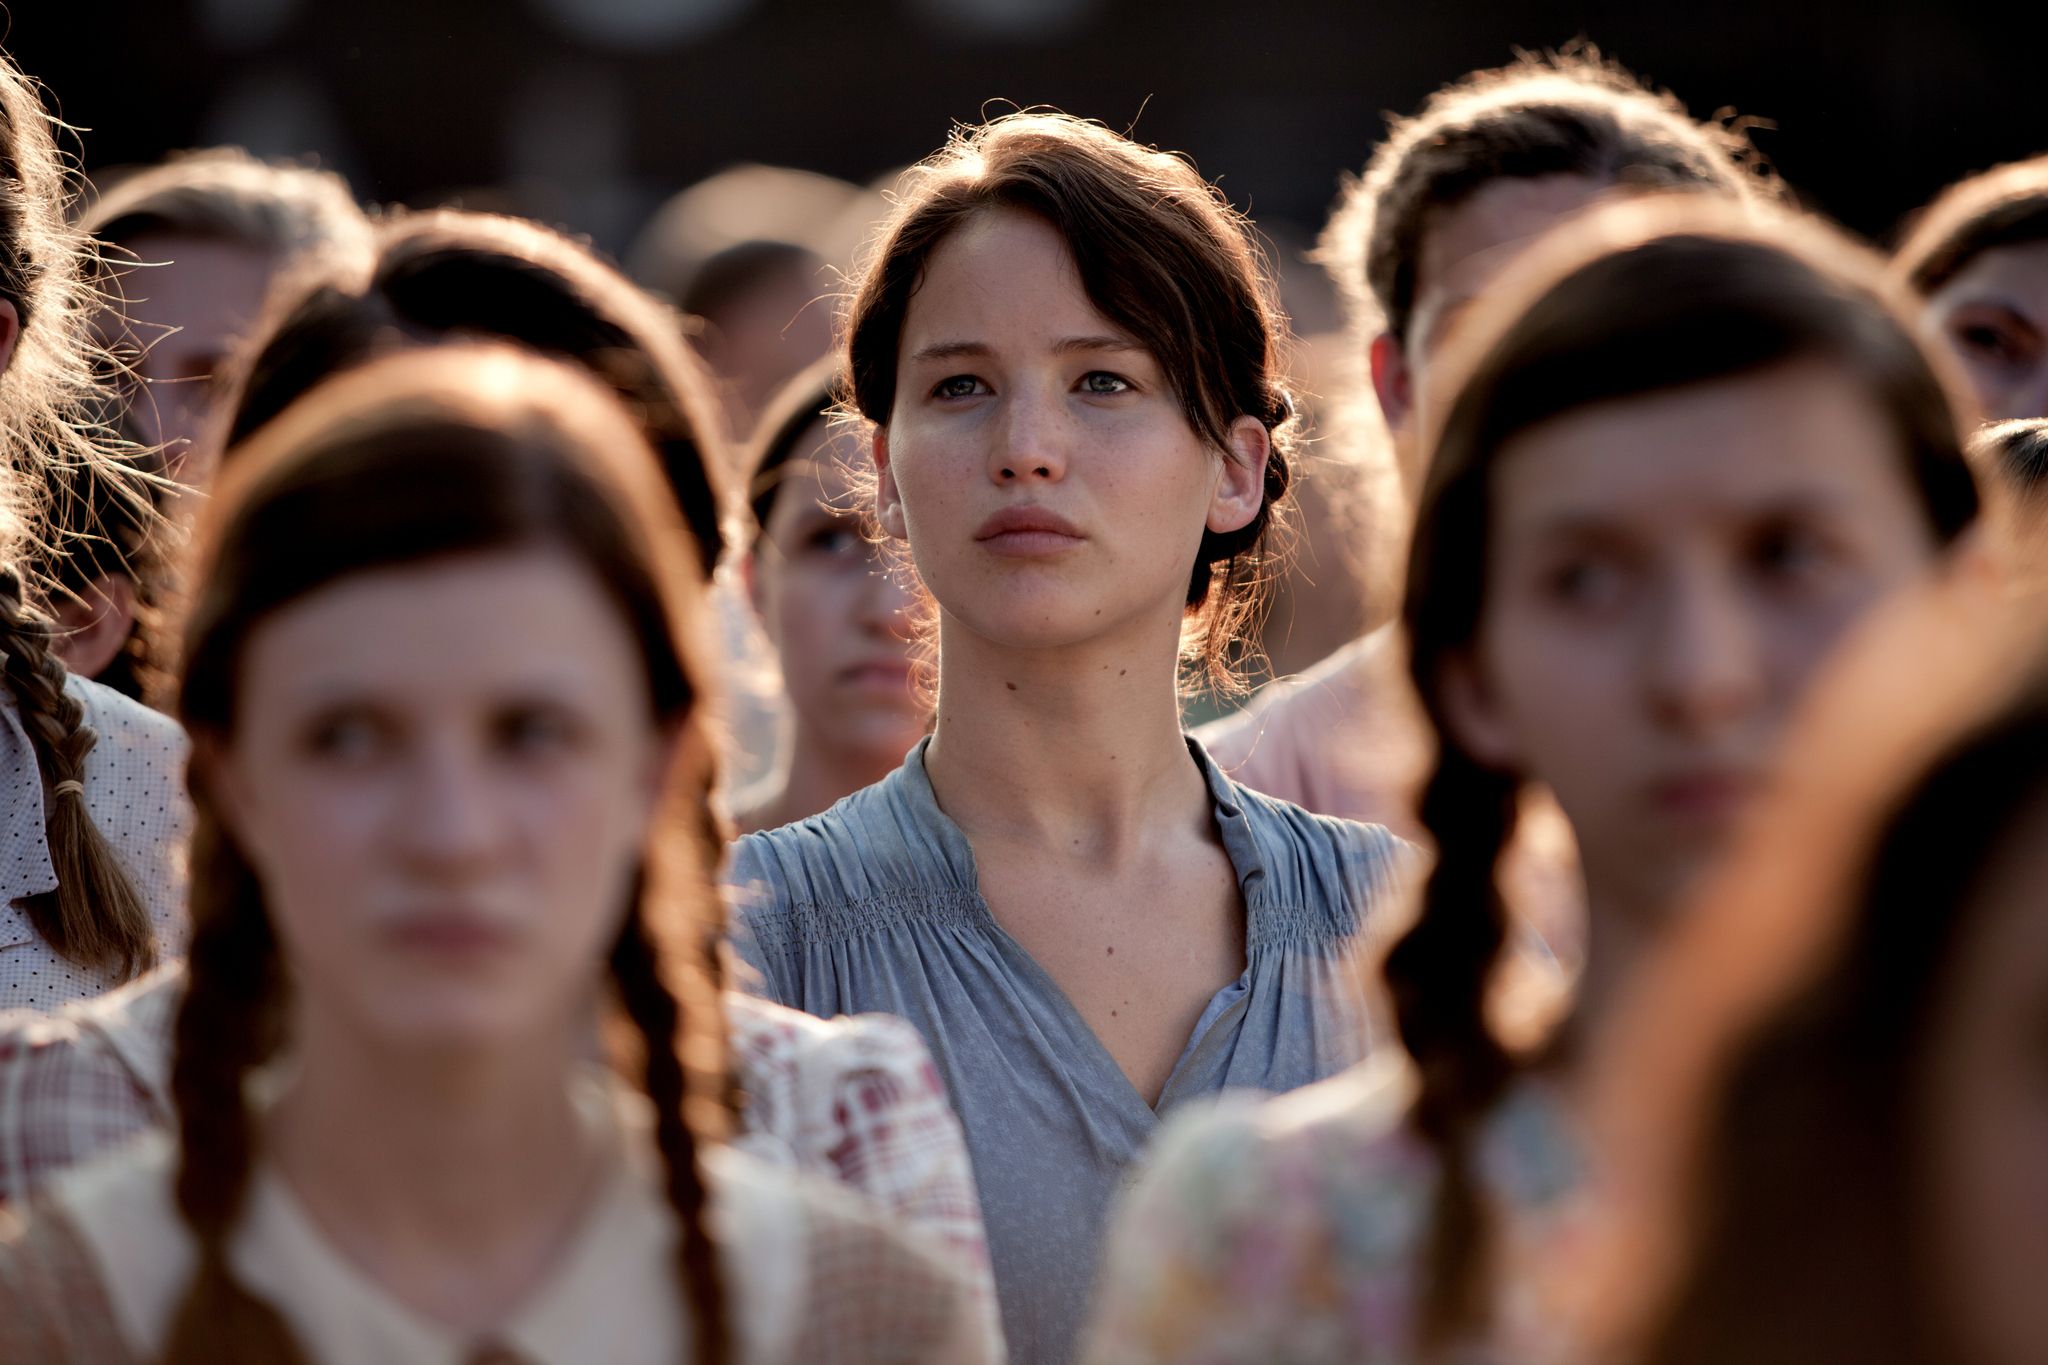 How to watch The Hunger Games films in order